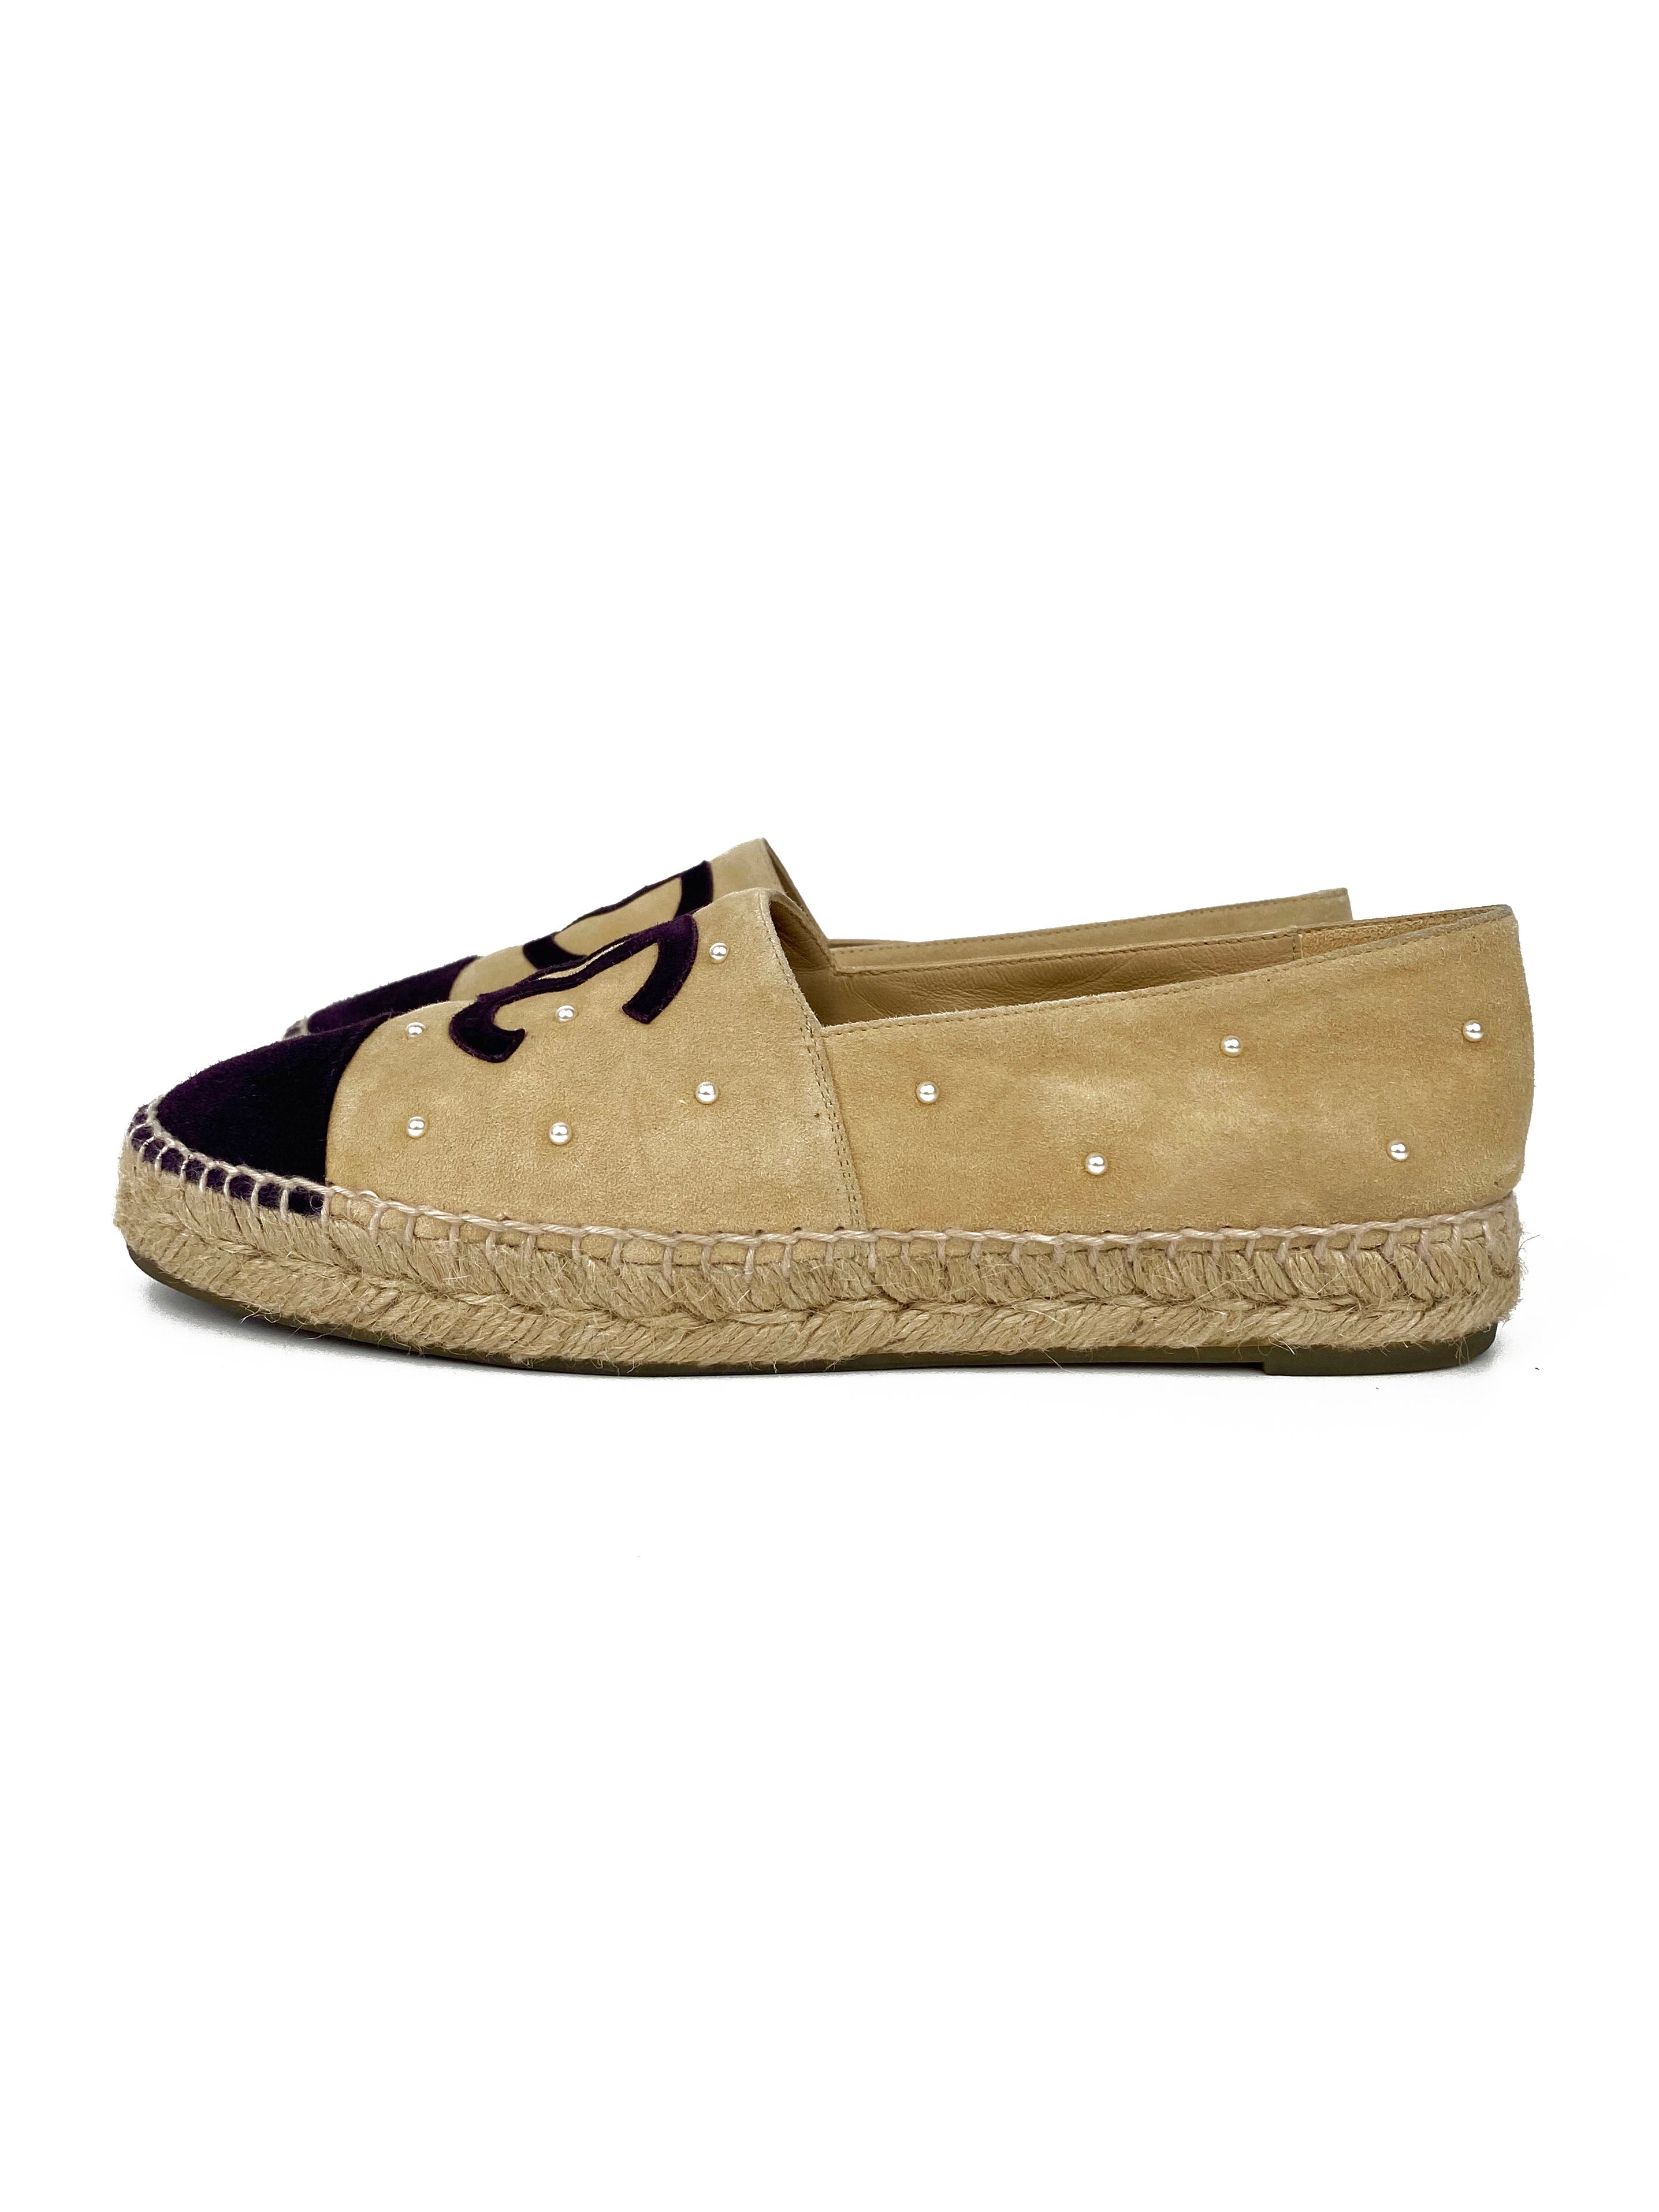 Chanel CC Pearl Studded Suede Espadrilles 39